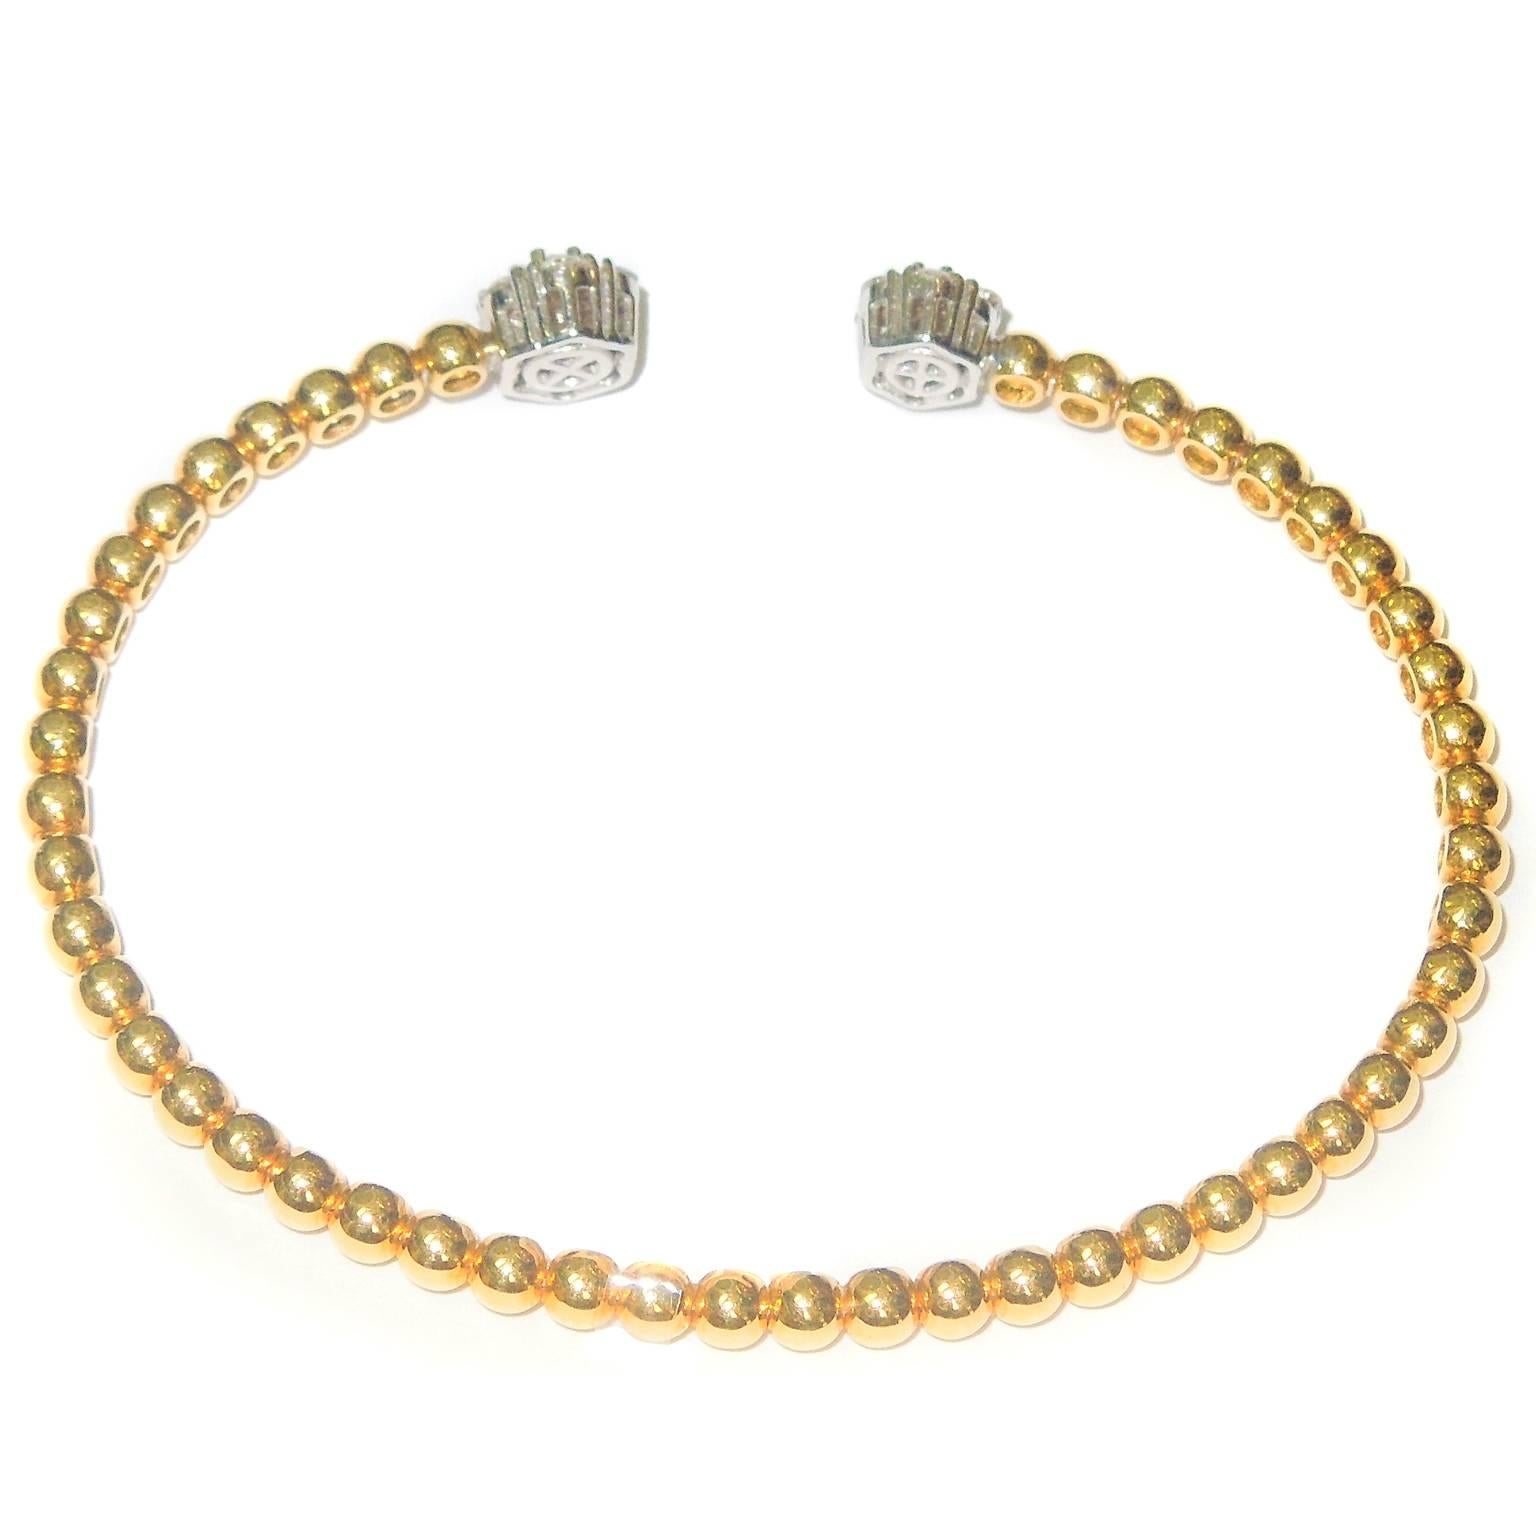 18K Yellow Gold Flexible Bracelet with Two Diamond Clusters

0.70ct. G Color VS Clarity Diamonds

Diamond clusters are both different sizes with different size diamonds

Larger cluster: 0.3 inch width
Small cluster: 0.2 inch width

Bracelet width